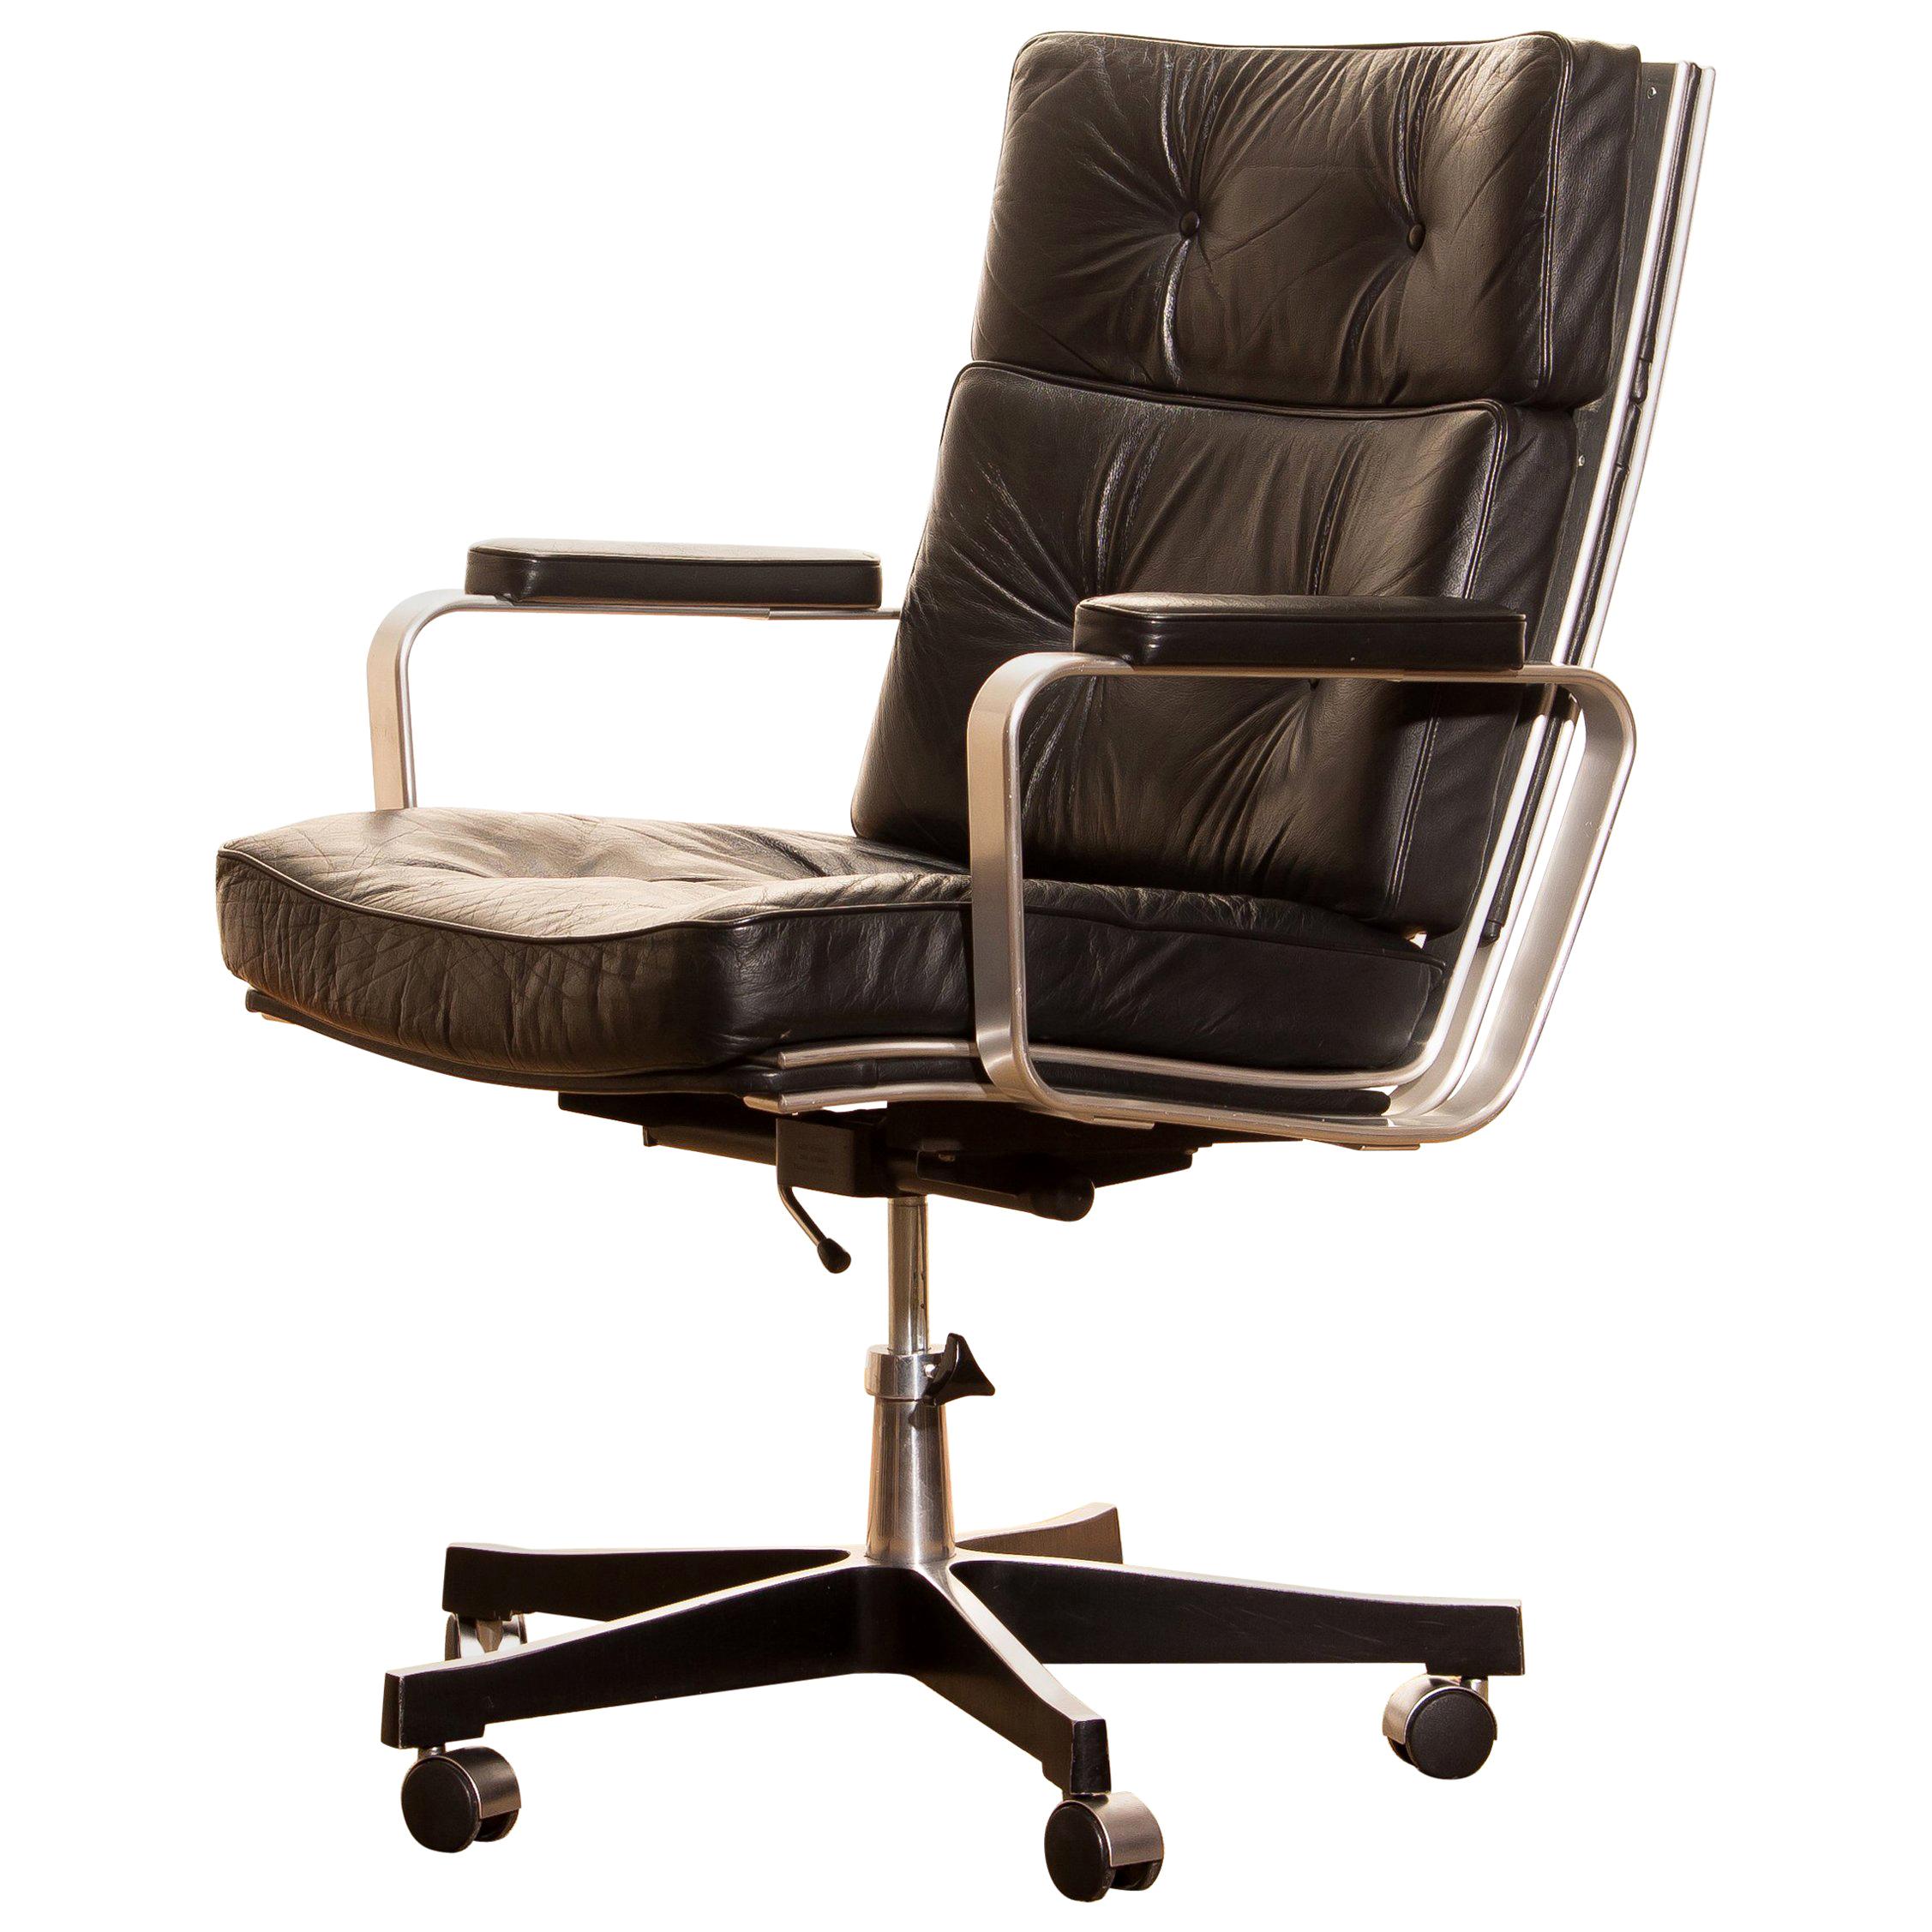 Beautiful adjustable office chair designed by Karl Erik Ekselius for JOC Design.
The nice thick solid black leather with an aluminum frame on wheels all in good condition.
The chair is extremely comfortable and newly filed.
Period: